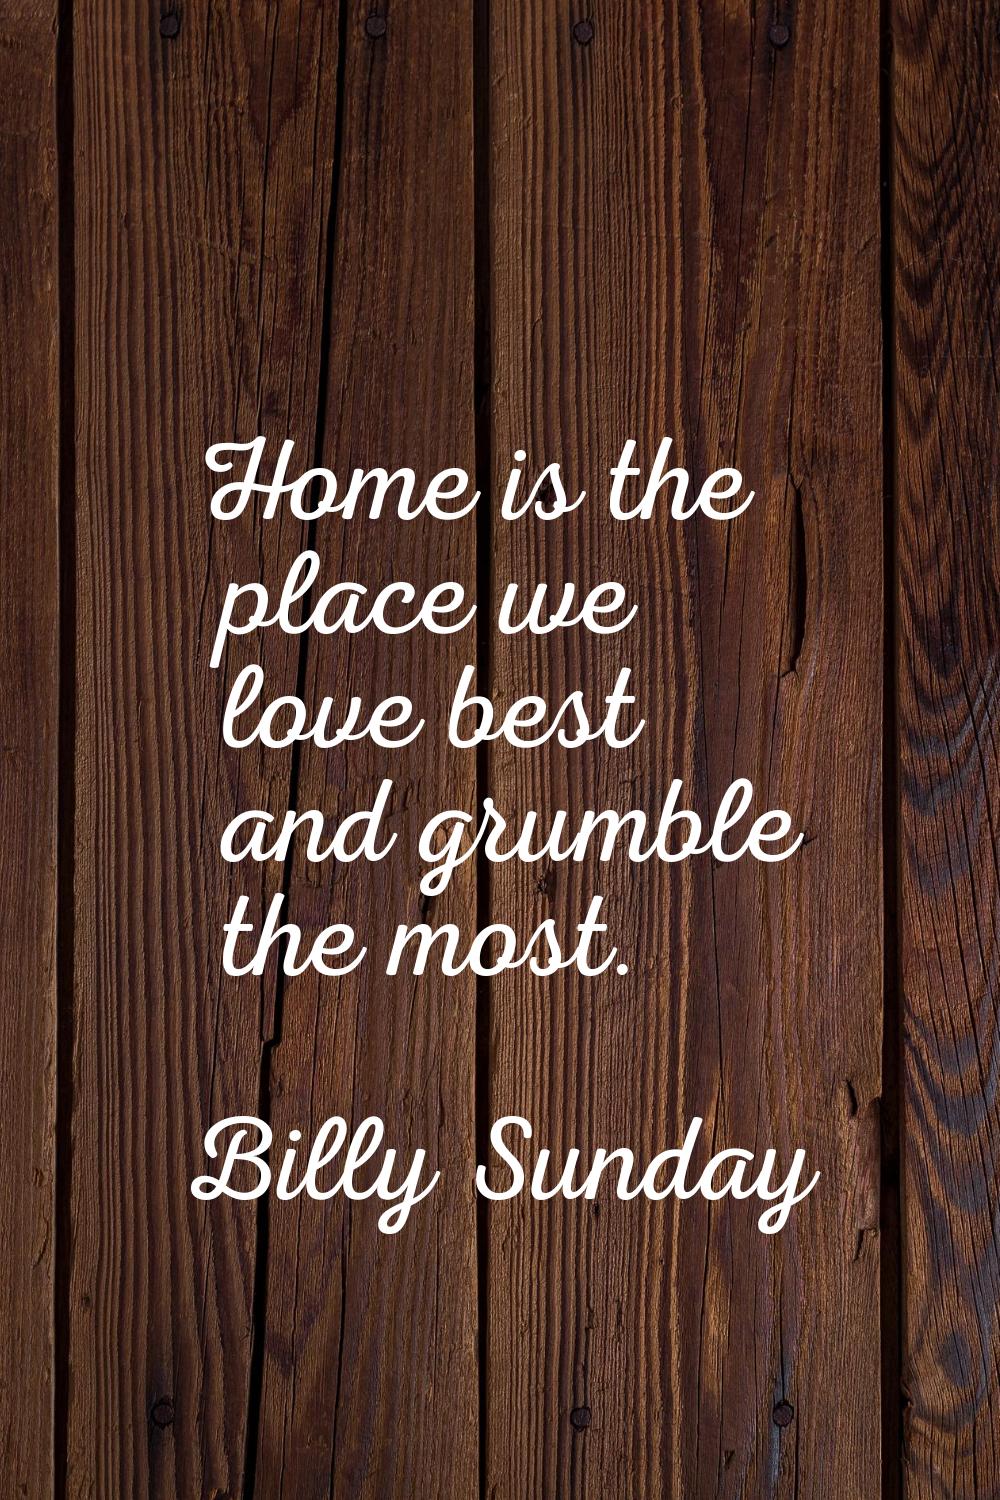 Home is the place we love best and grumble the most.